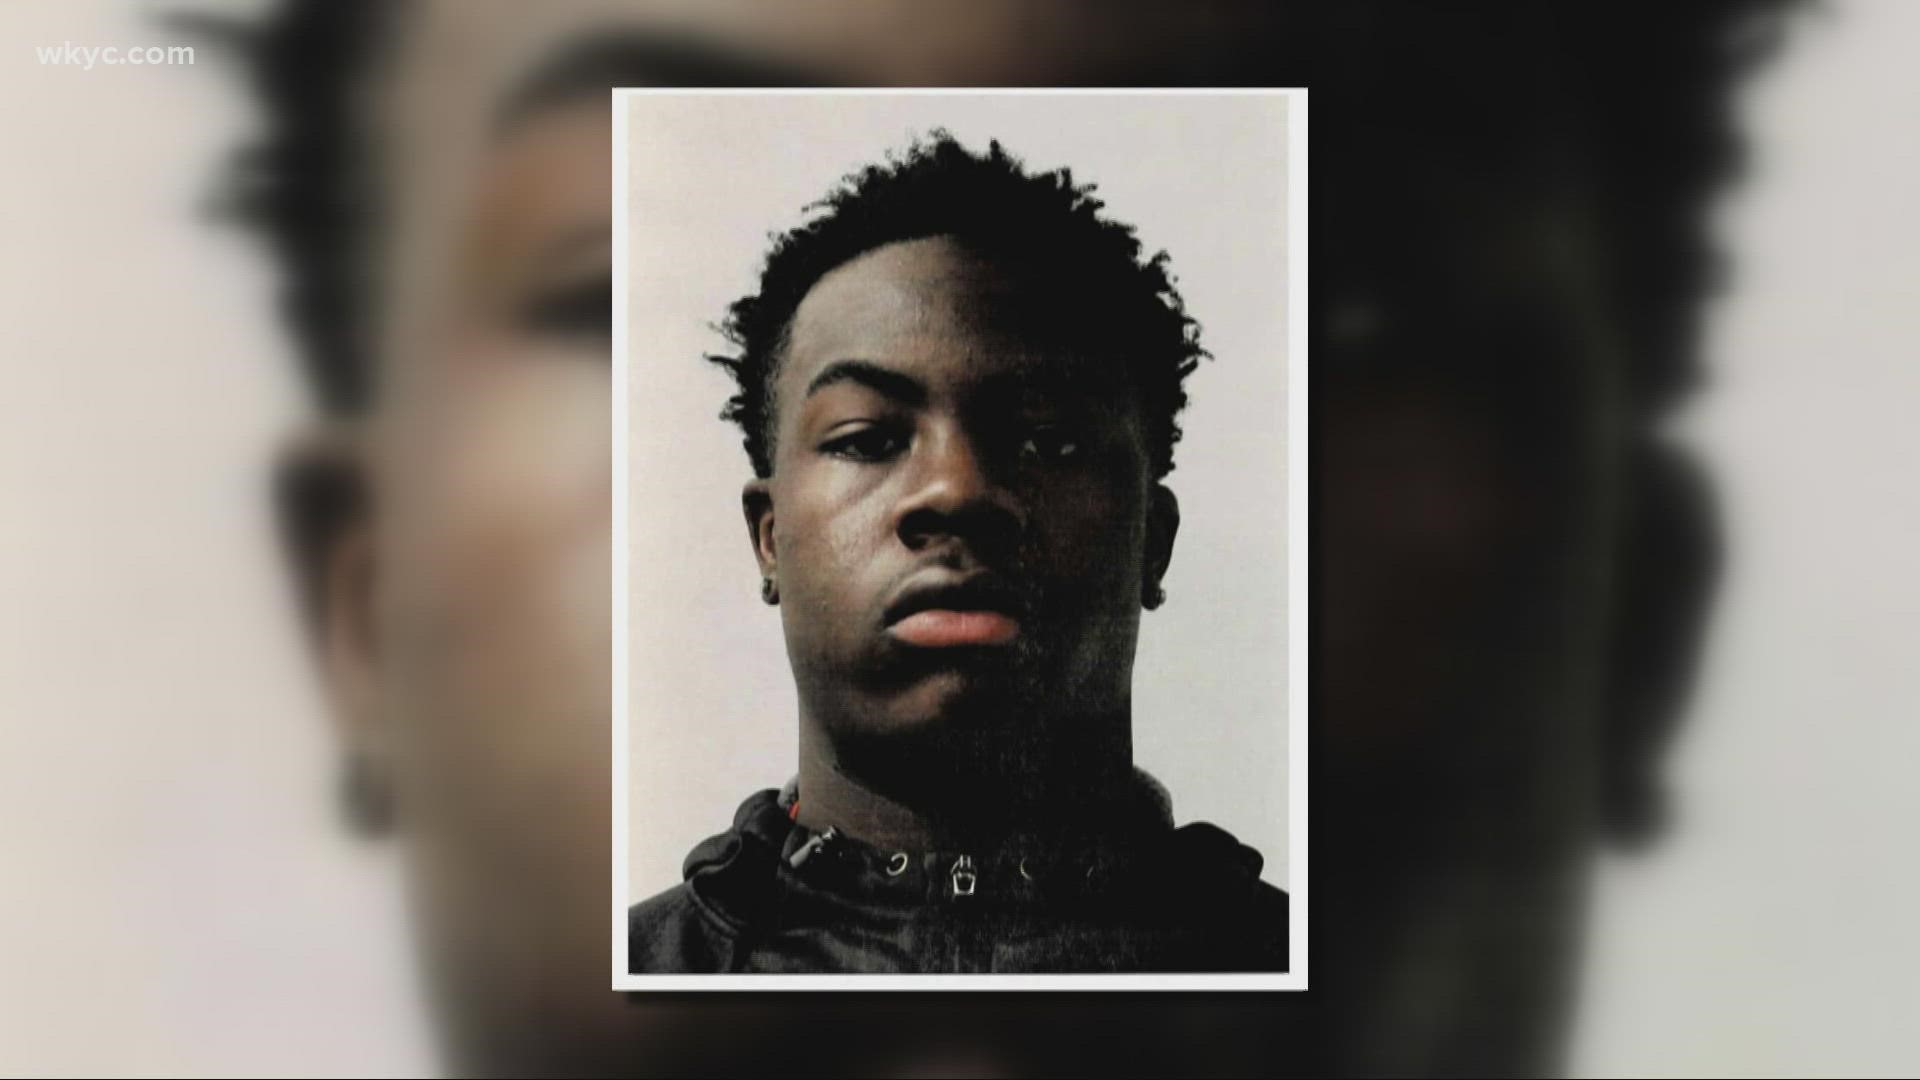 18-year-old Duane Tra'ron Jackson of Cleveland was arrested yesterday as a suspect.